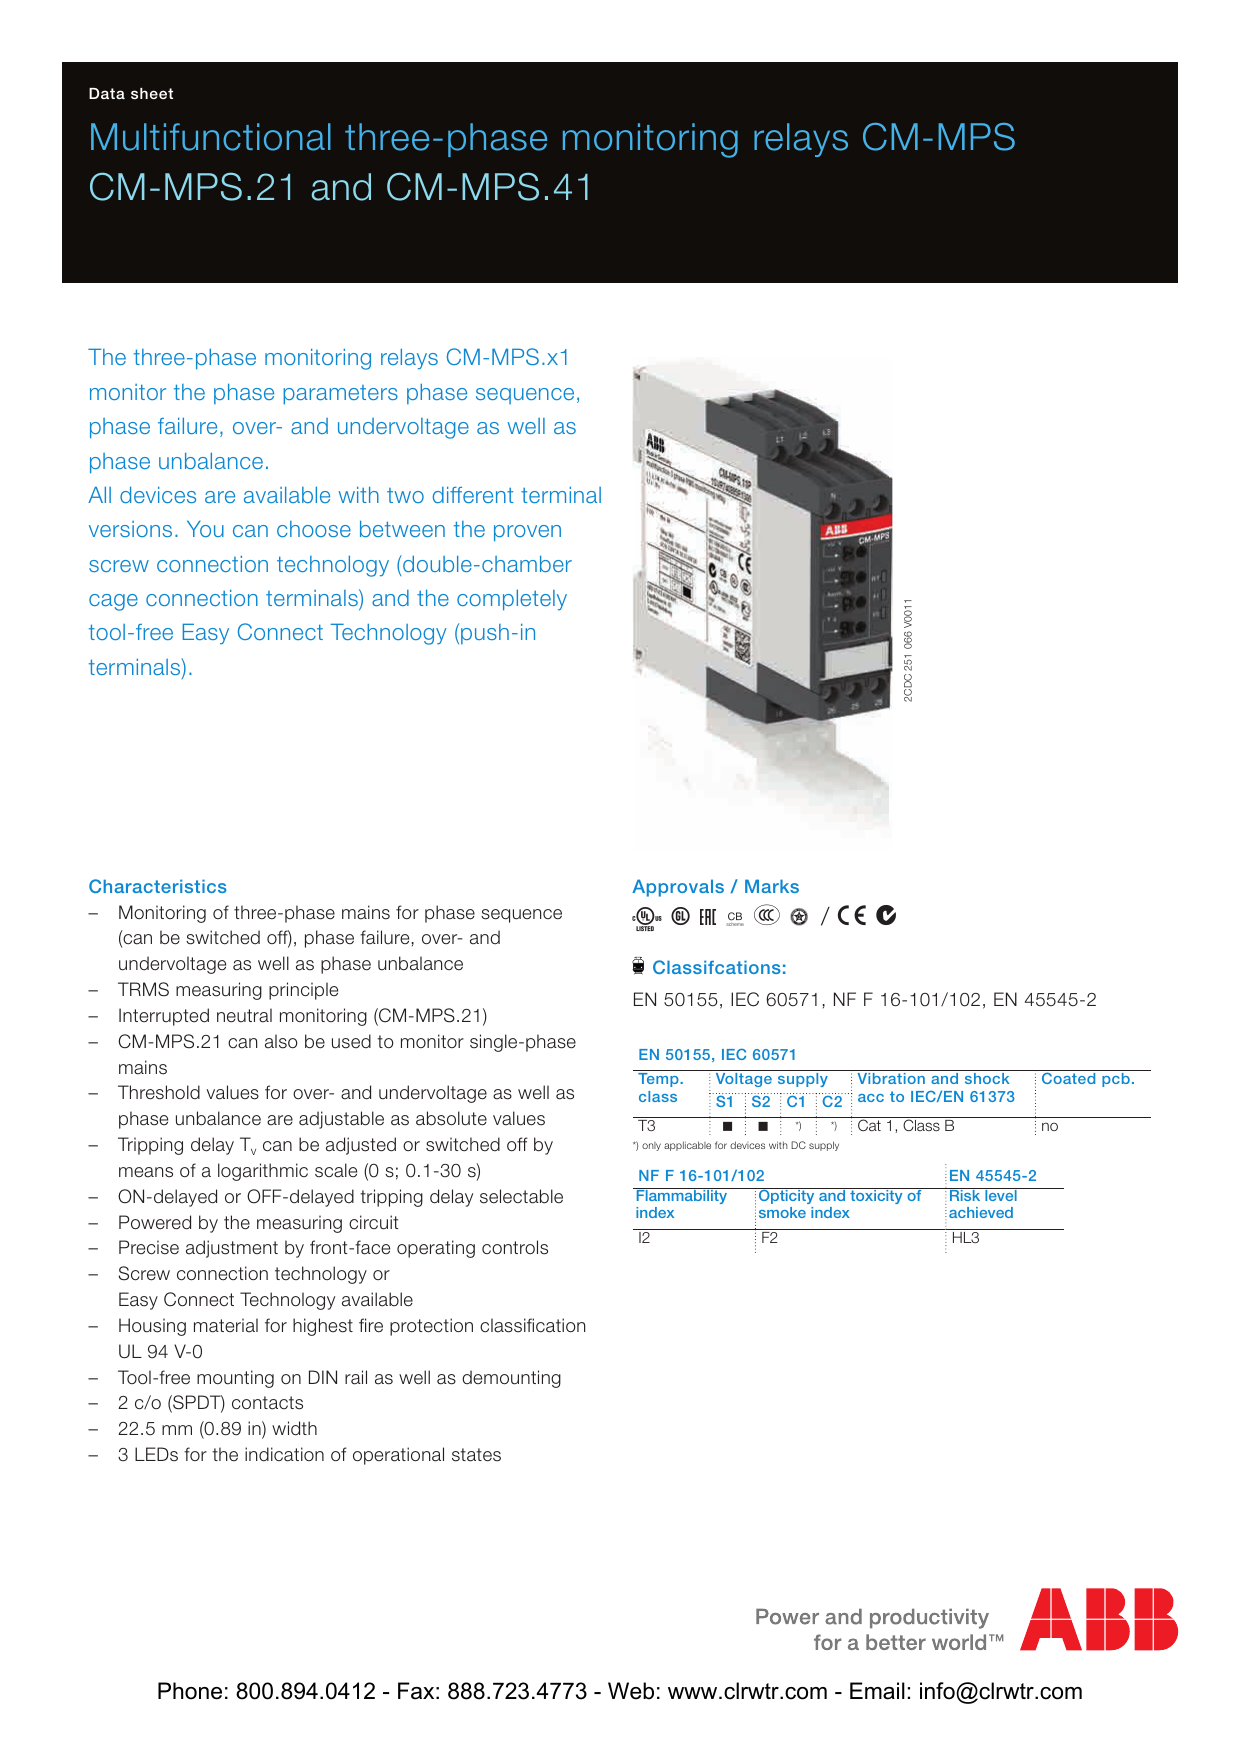 ONE New ABB Three-phase monitoring relay CM-MPS.21